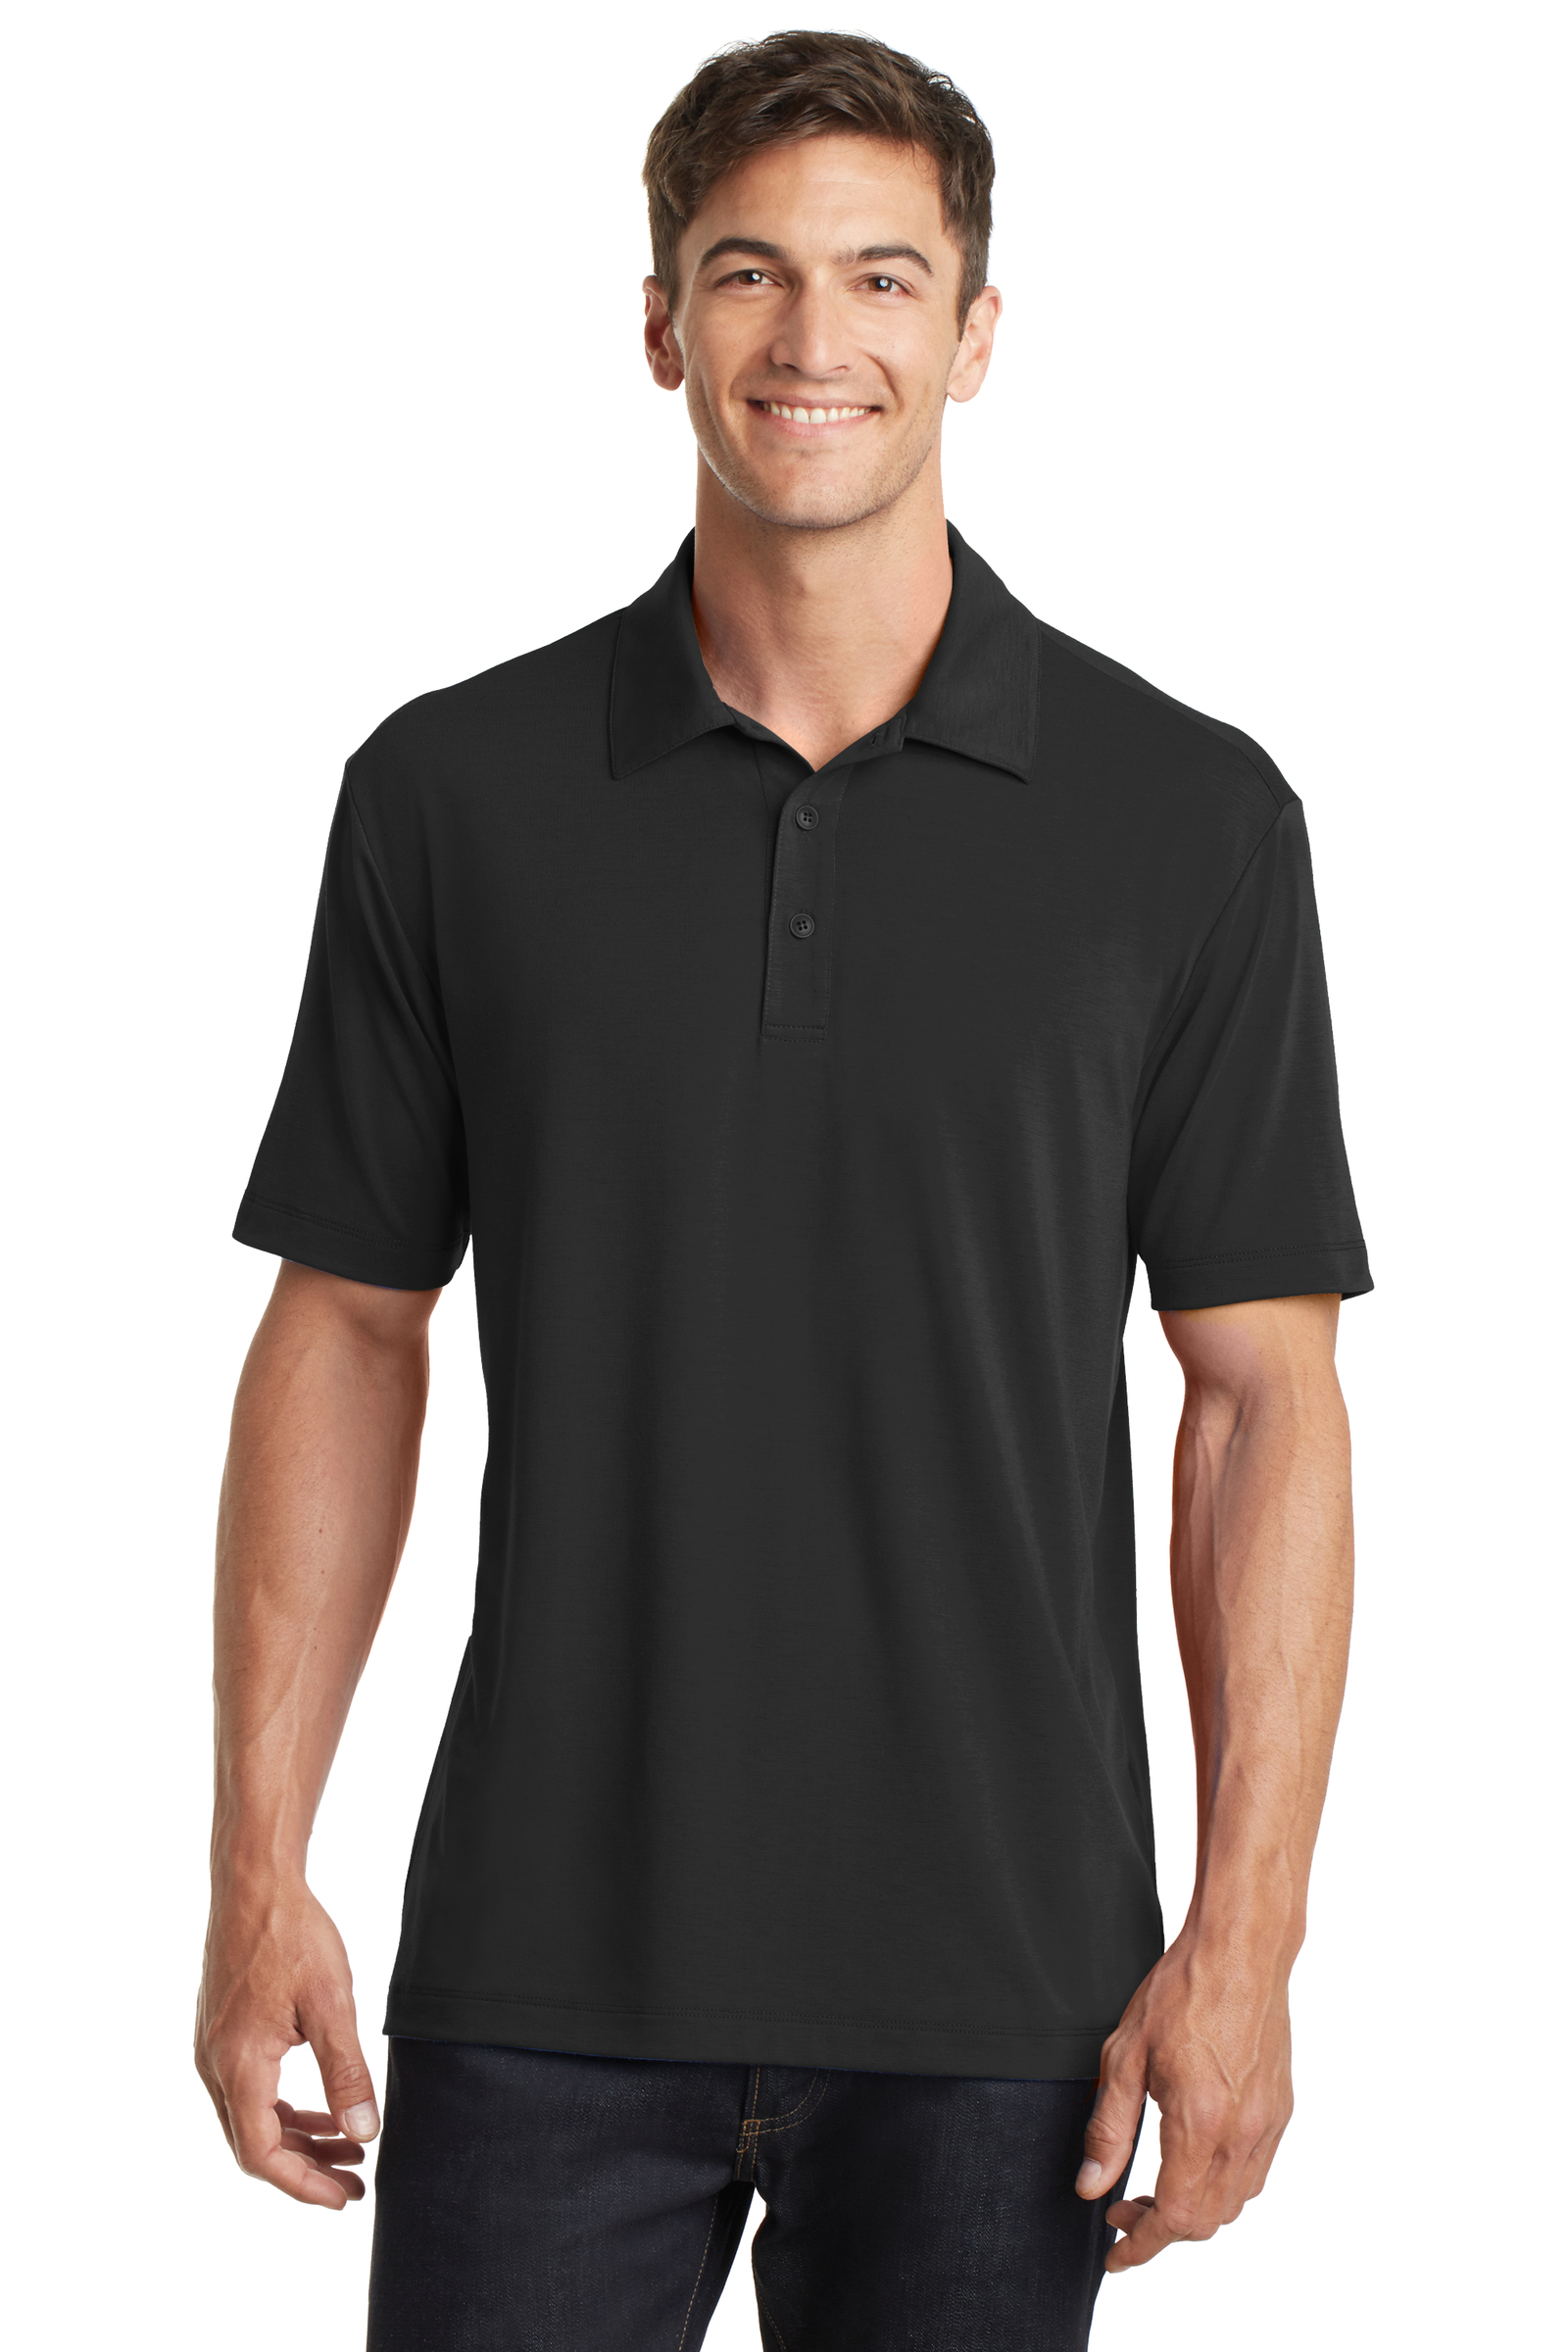 Port Authority Embroidered Men's Comfort Touch Performance Polo